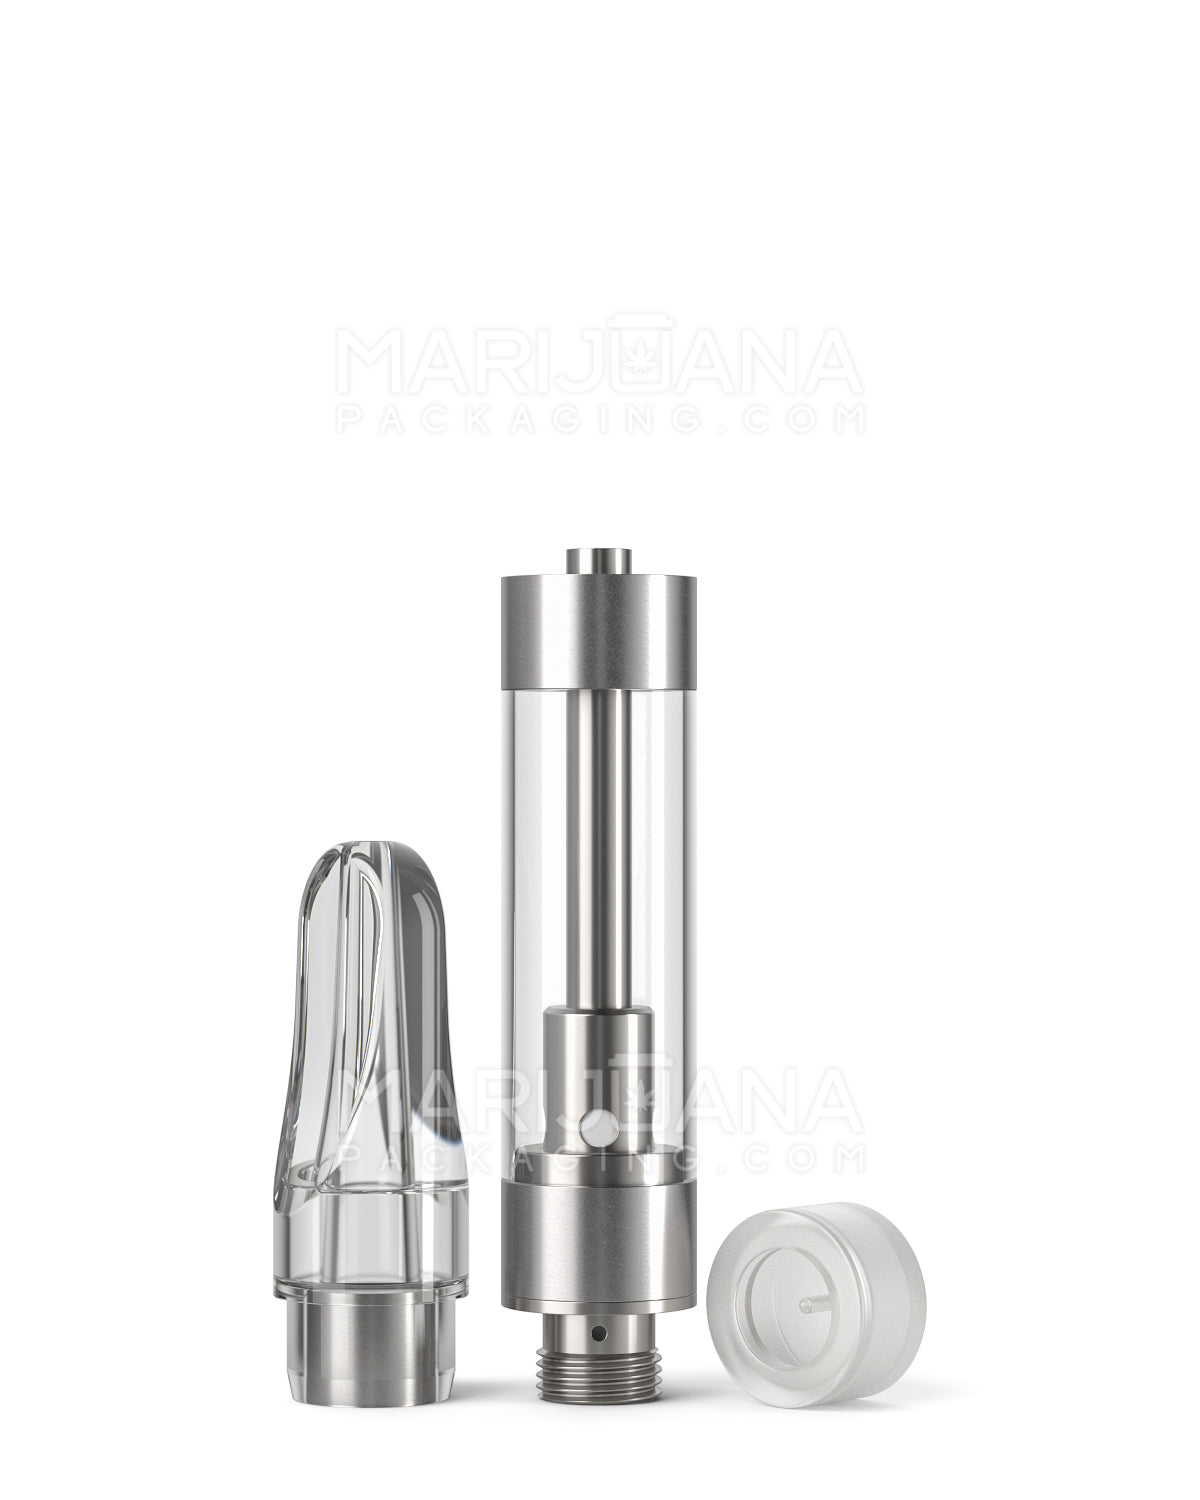 CCELL | Liquid6 Reactor Plastic Vape Cartridge with Clear Plastic Mouthpiece | 1mL - Press On - 100 Count - 5